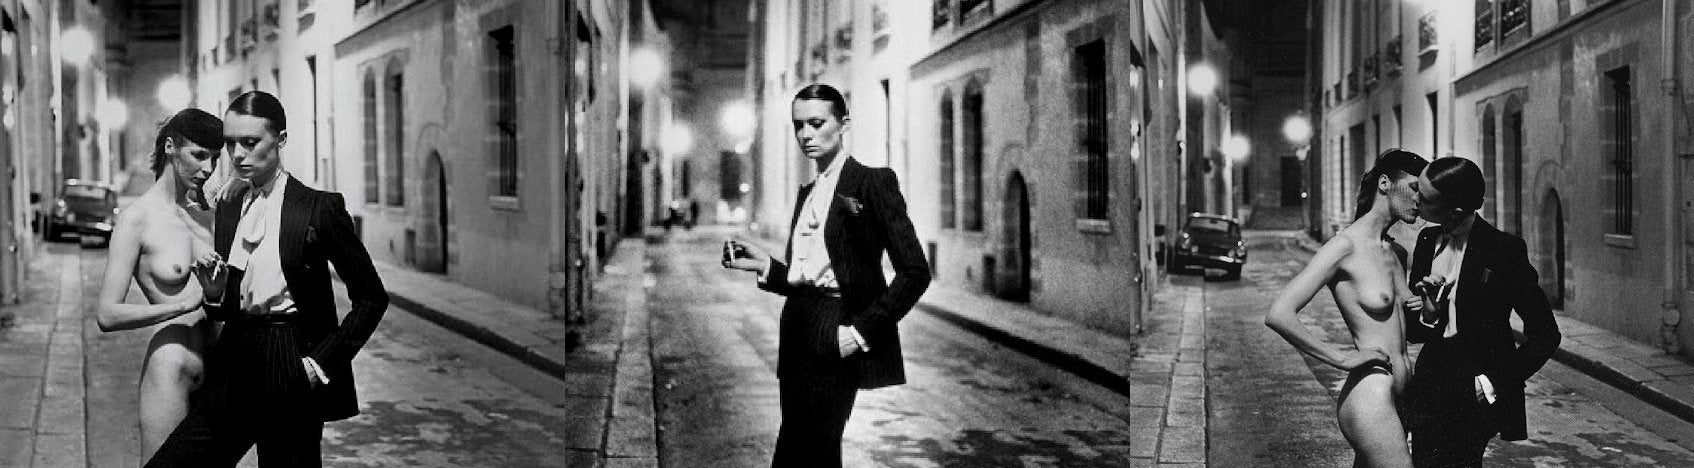 The Story Behind Helmut Newton's Rue Aubriot Photograph - Global Images USA